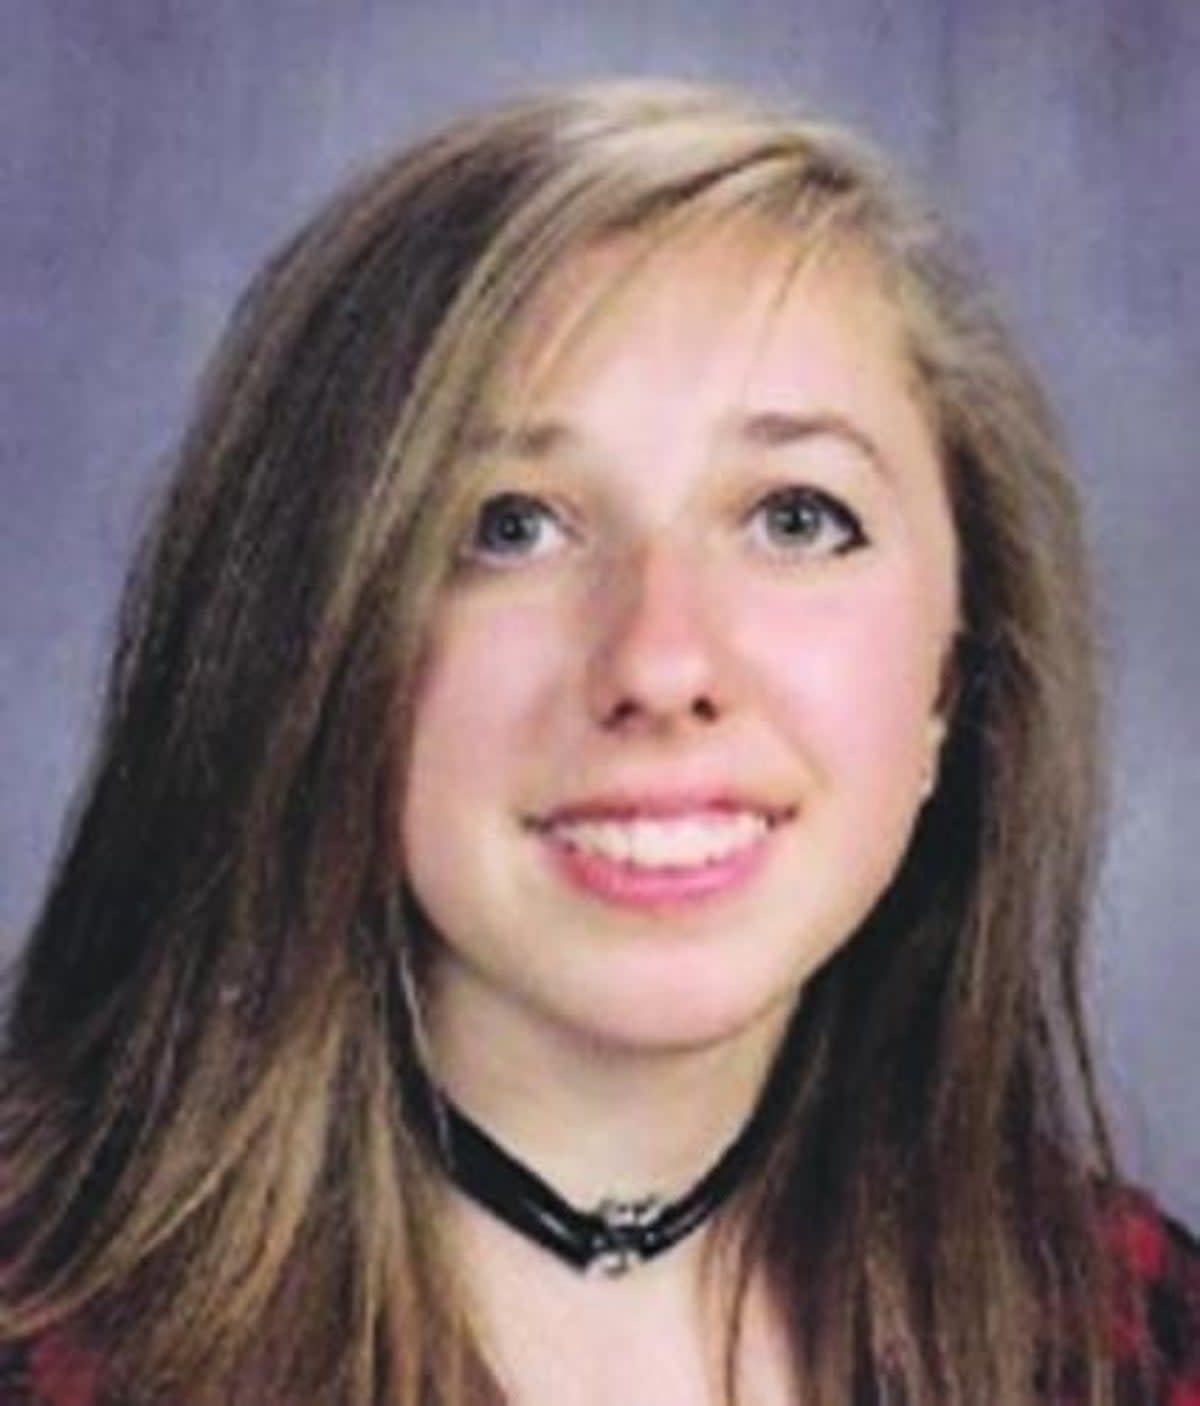 Riley Whitelaw, 17, was found murdered on 11 June in the breakroom of the Colorado Walgreens where she worked part-time (obits.gazette.com)